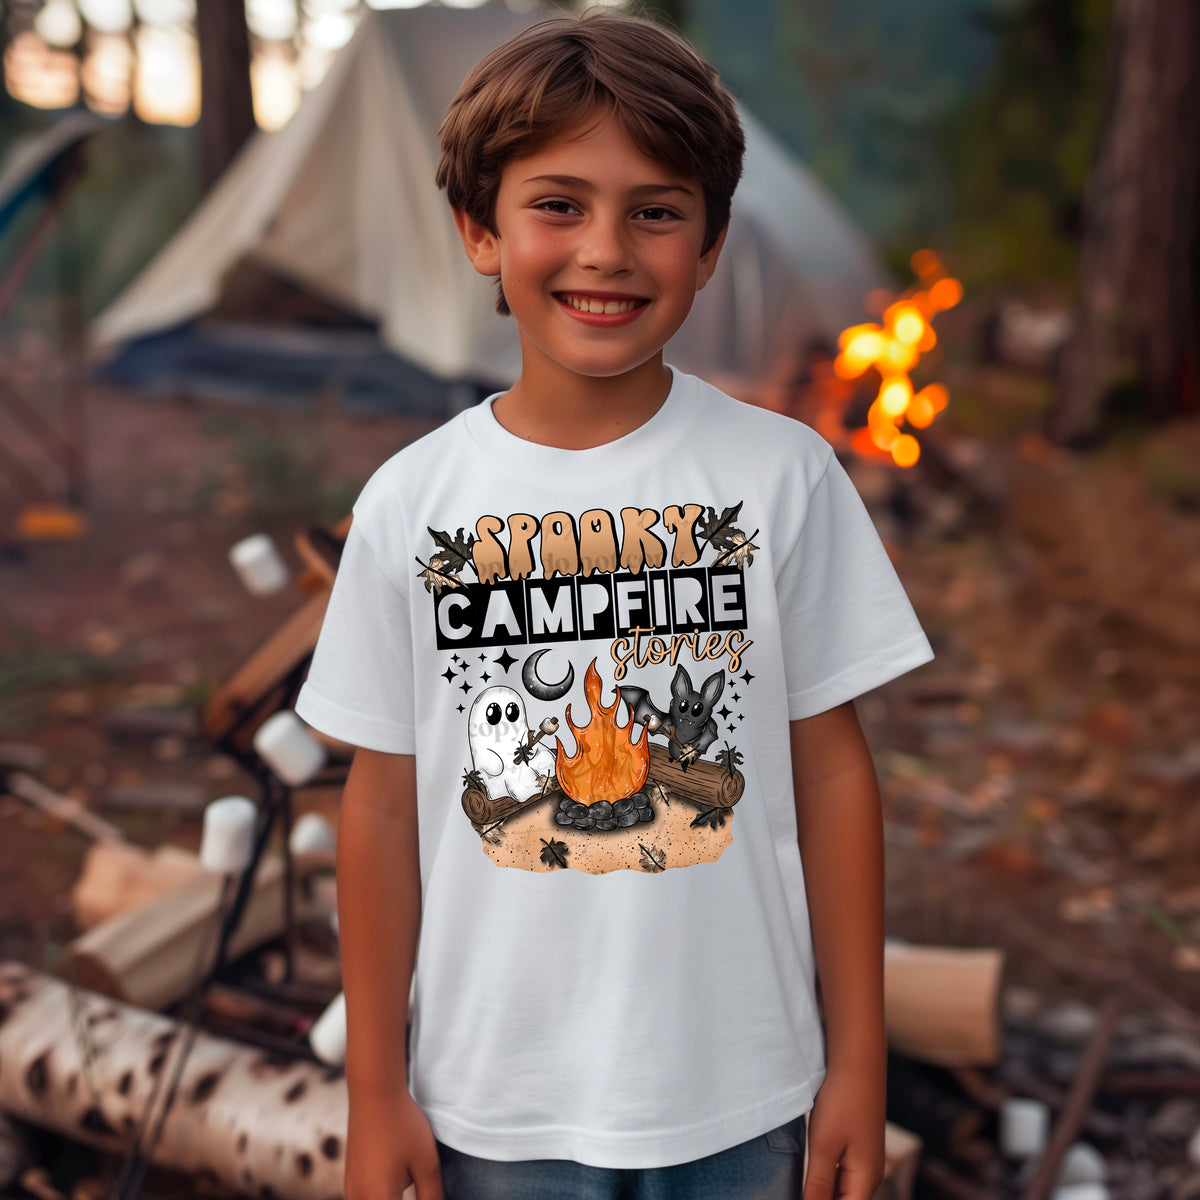 Spooky campfire stories